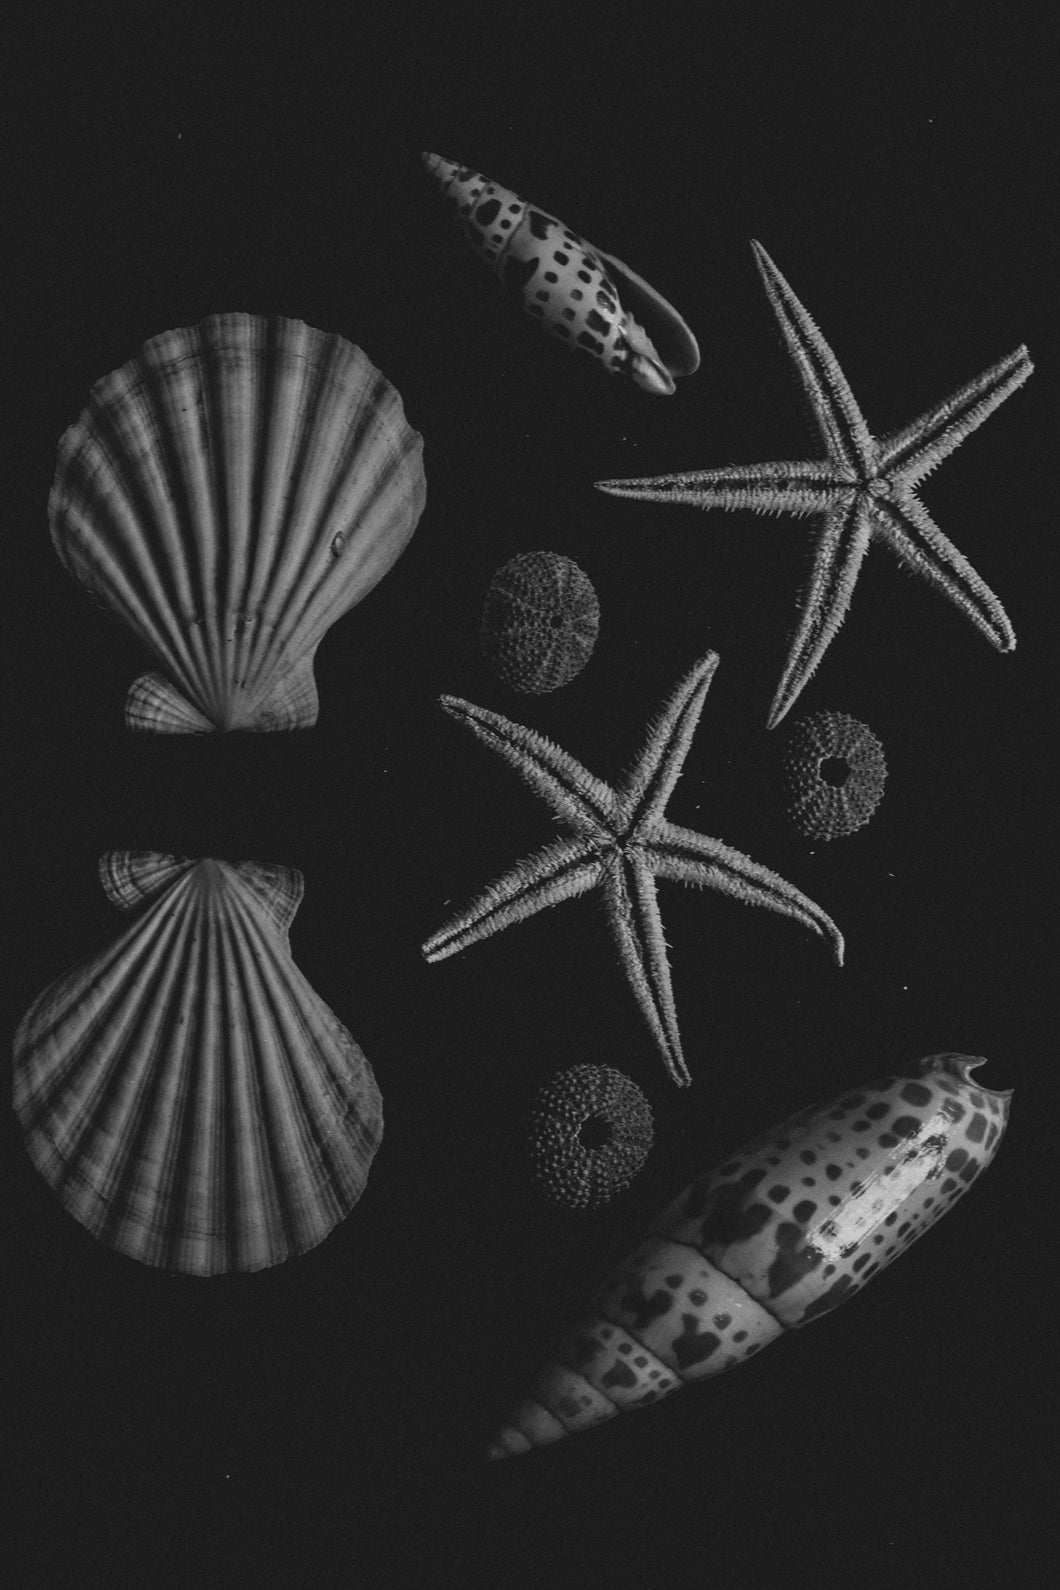 Mix of shells in b&w